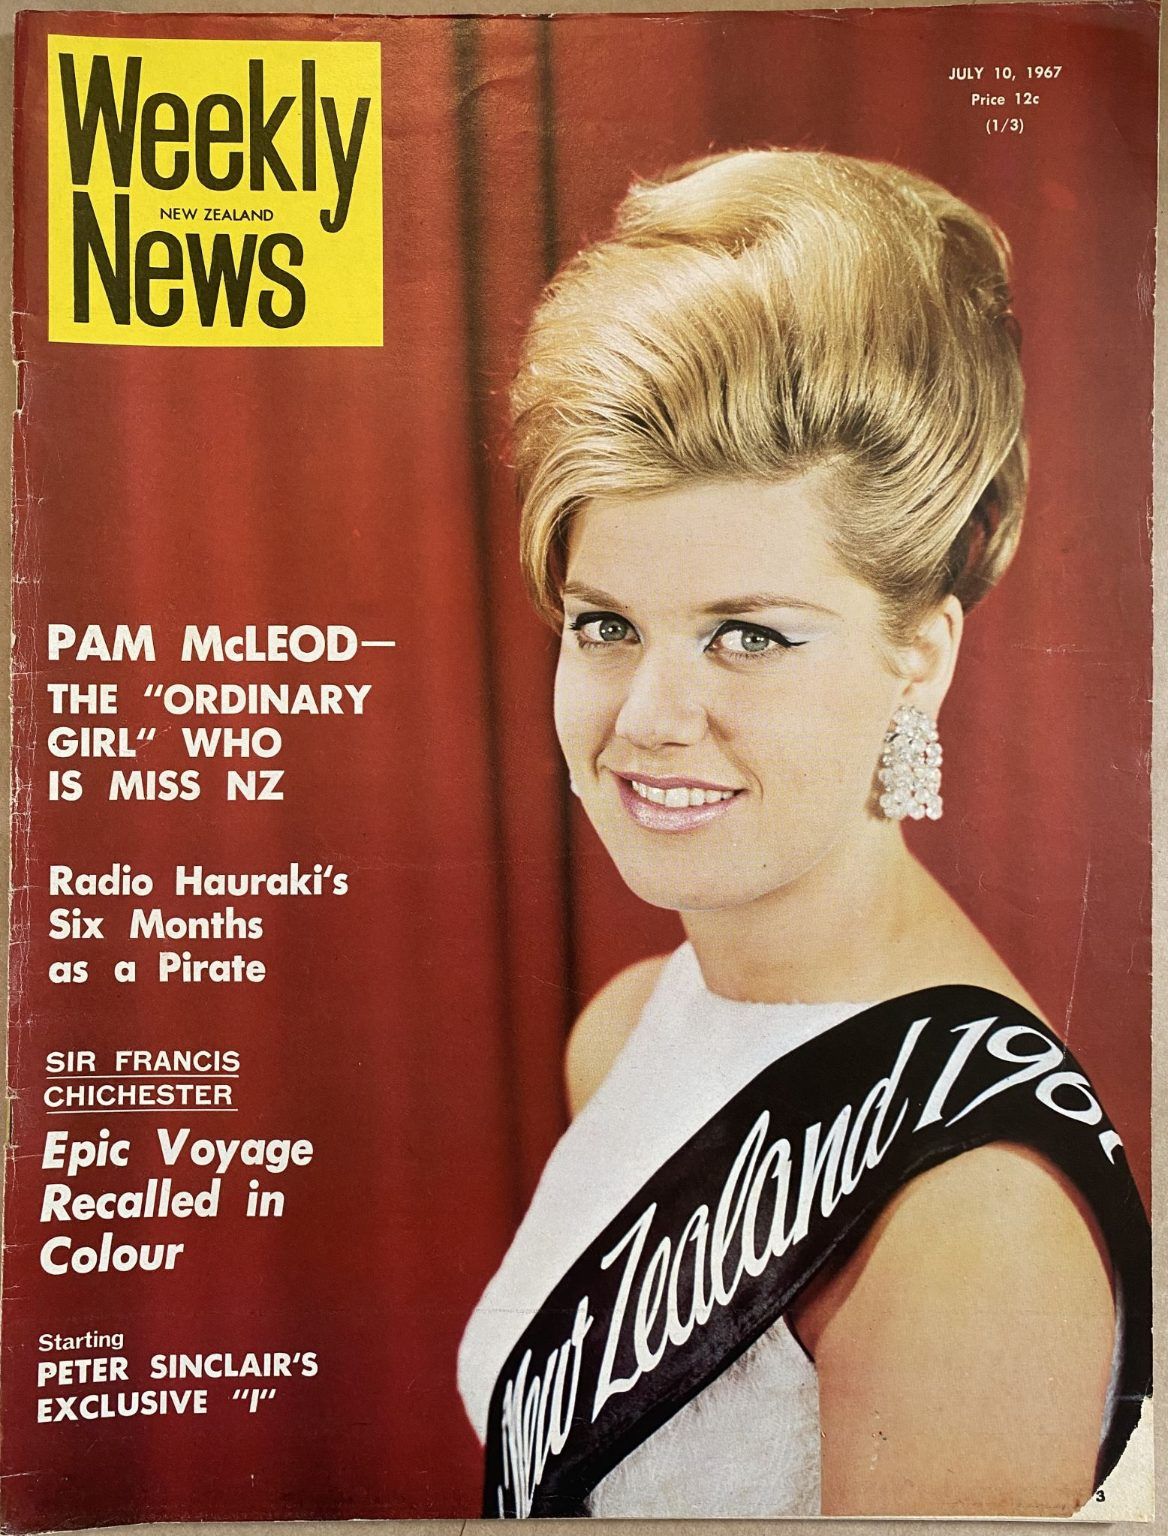 OLD NEWSPAPER: New Zealand Weekly News, No. 5406, 10 July 1967